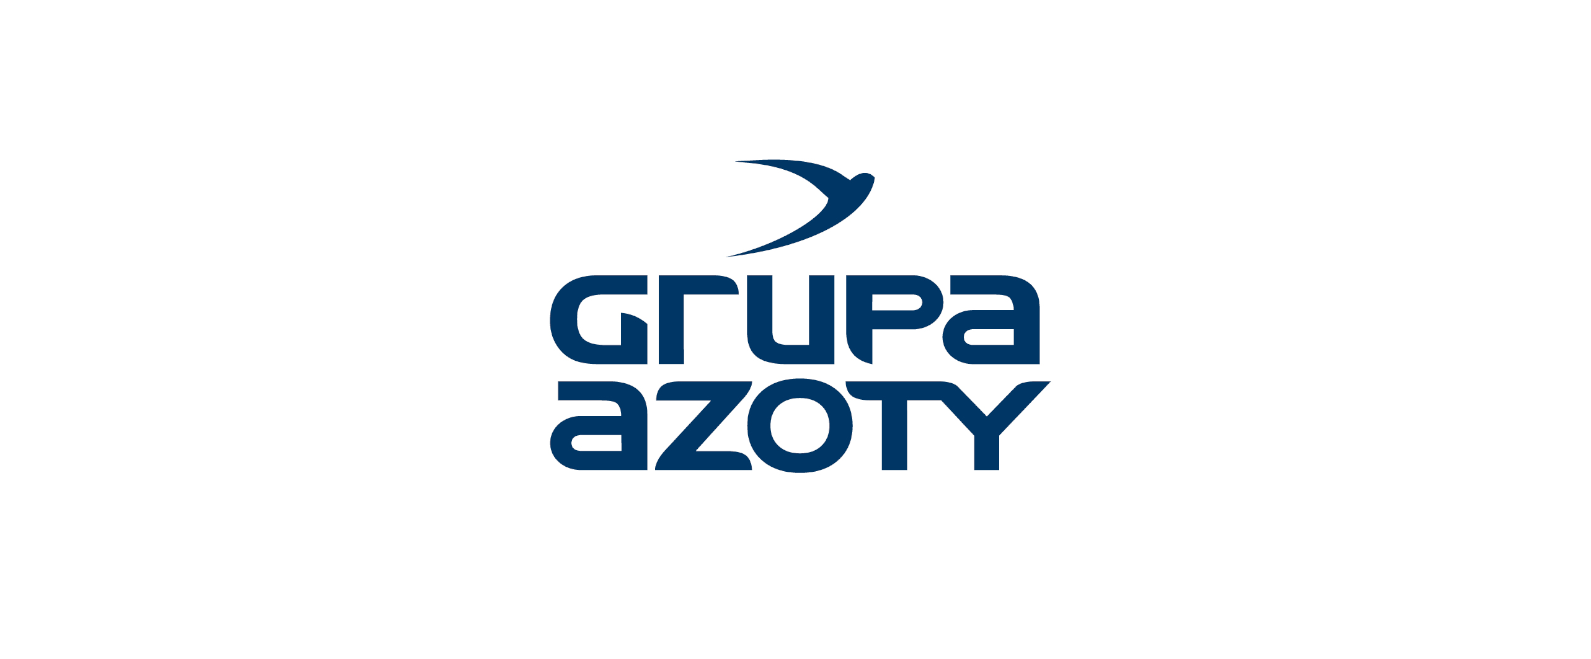 Grupa Azoty announcement in connection with sanctions imposed on Viatcheslav Kantor and his related parties